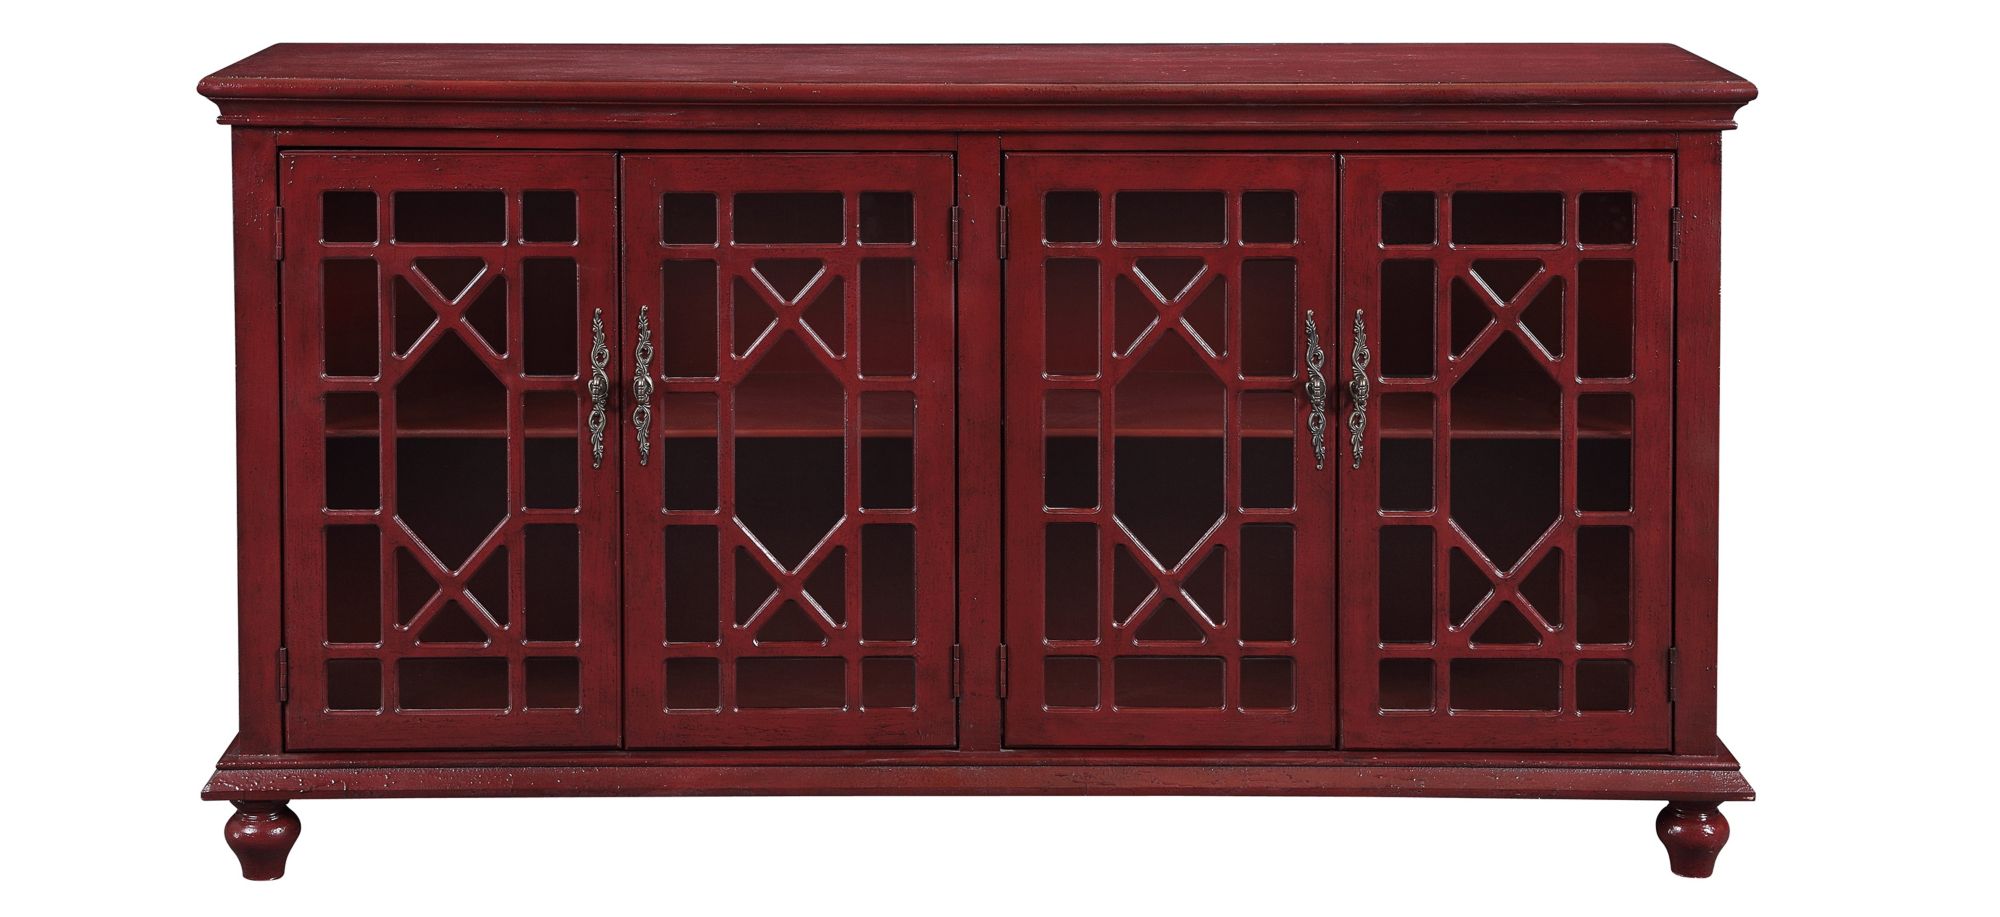 Millstone 72" Media Credenza in Esnon Texture Red by Coast To Coast Imports